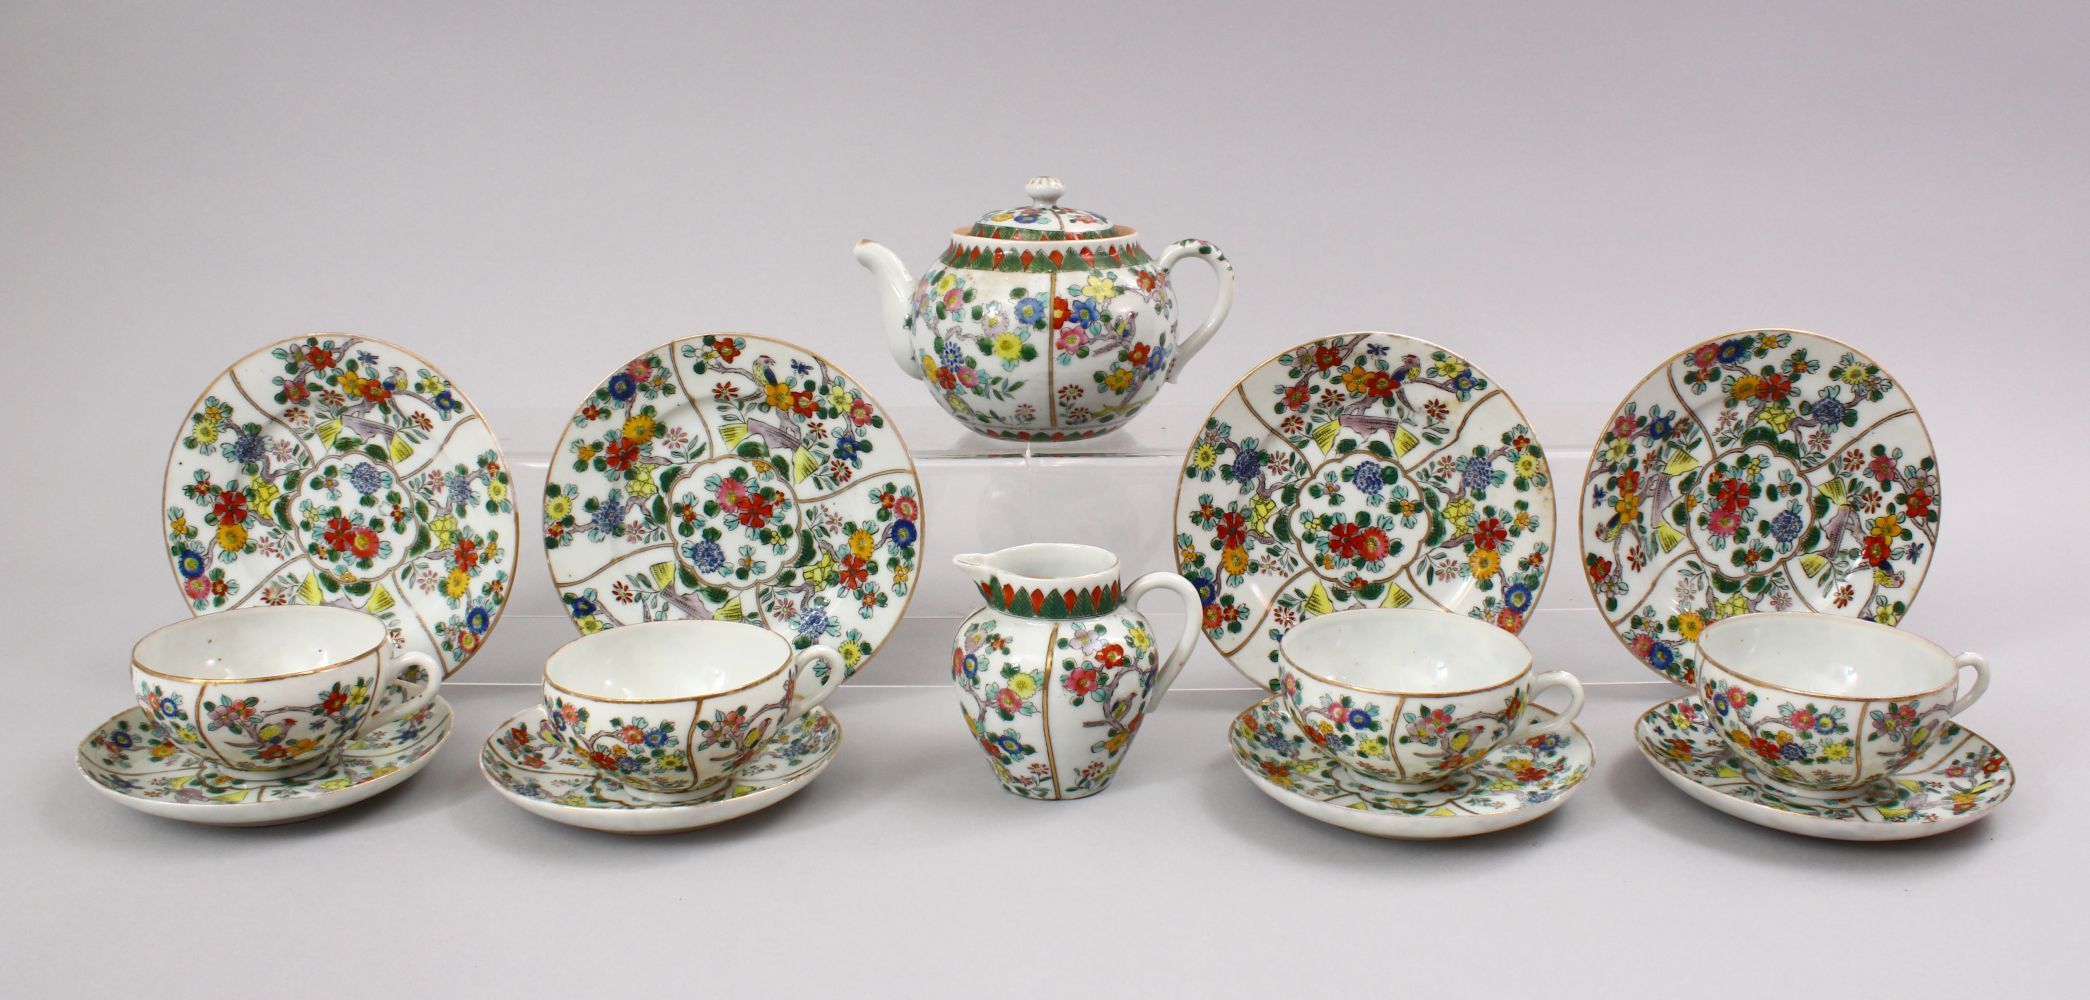 AN ORIENTAL FAMILLE ROSE PORCELAIN PART TEA SERVICE, WITH FLORAL DECORATION, the bases with black